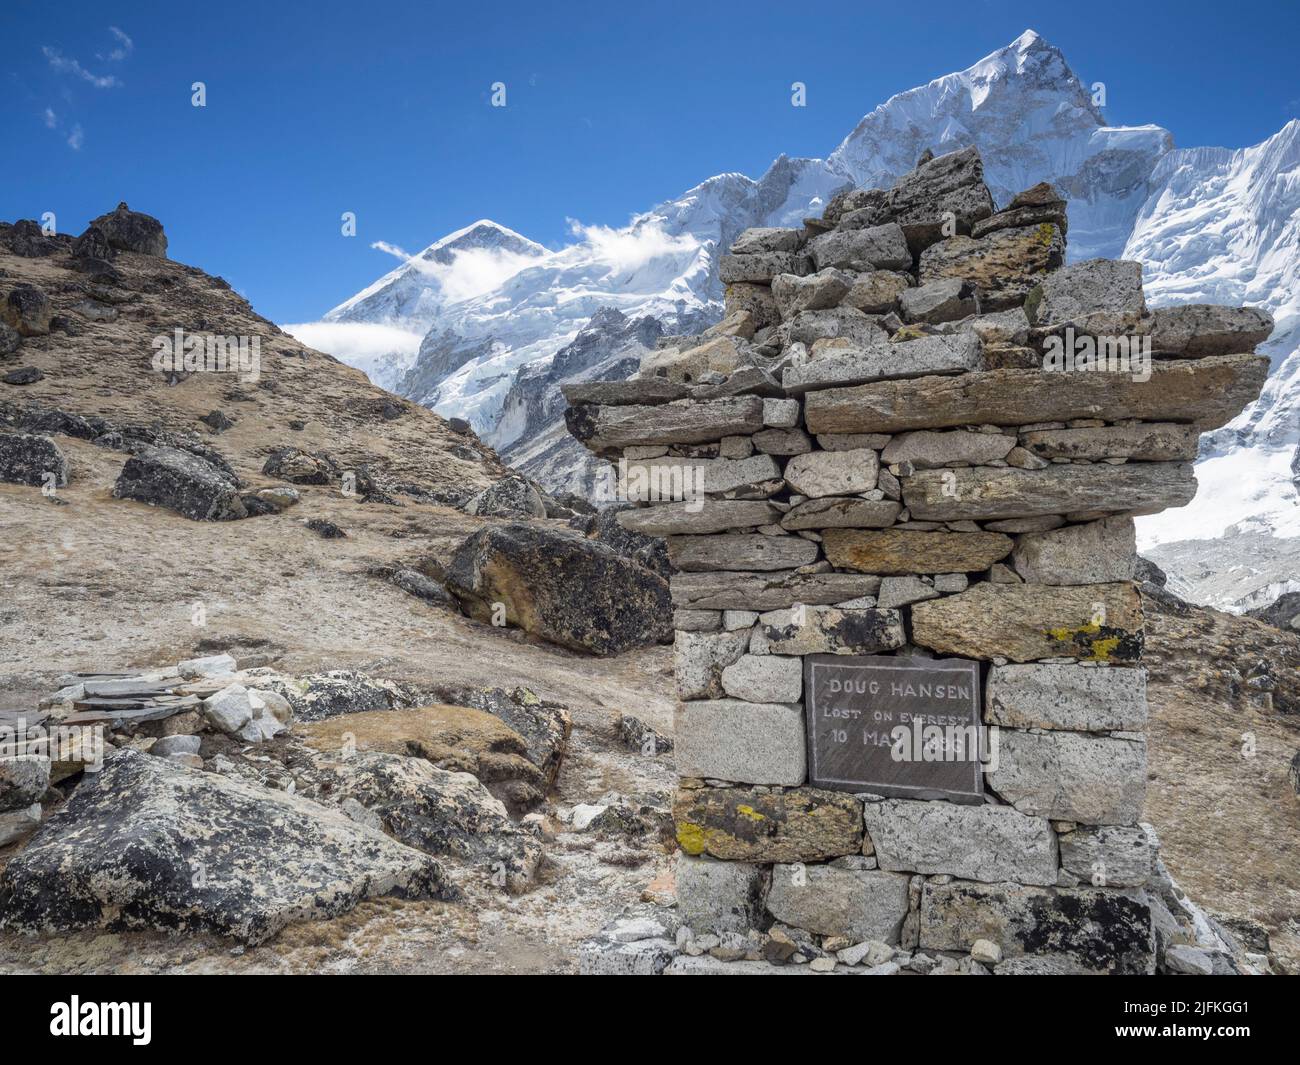 Adventure Consultants memorial to American climber Doug Hansen above Gorak Shep with the West Shoulder and Nuptse Nup II (7732m) in the bg. Stock Photo